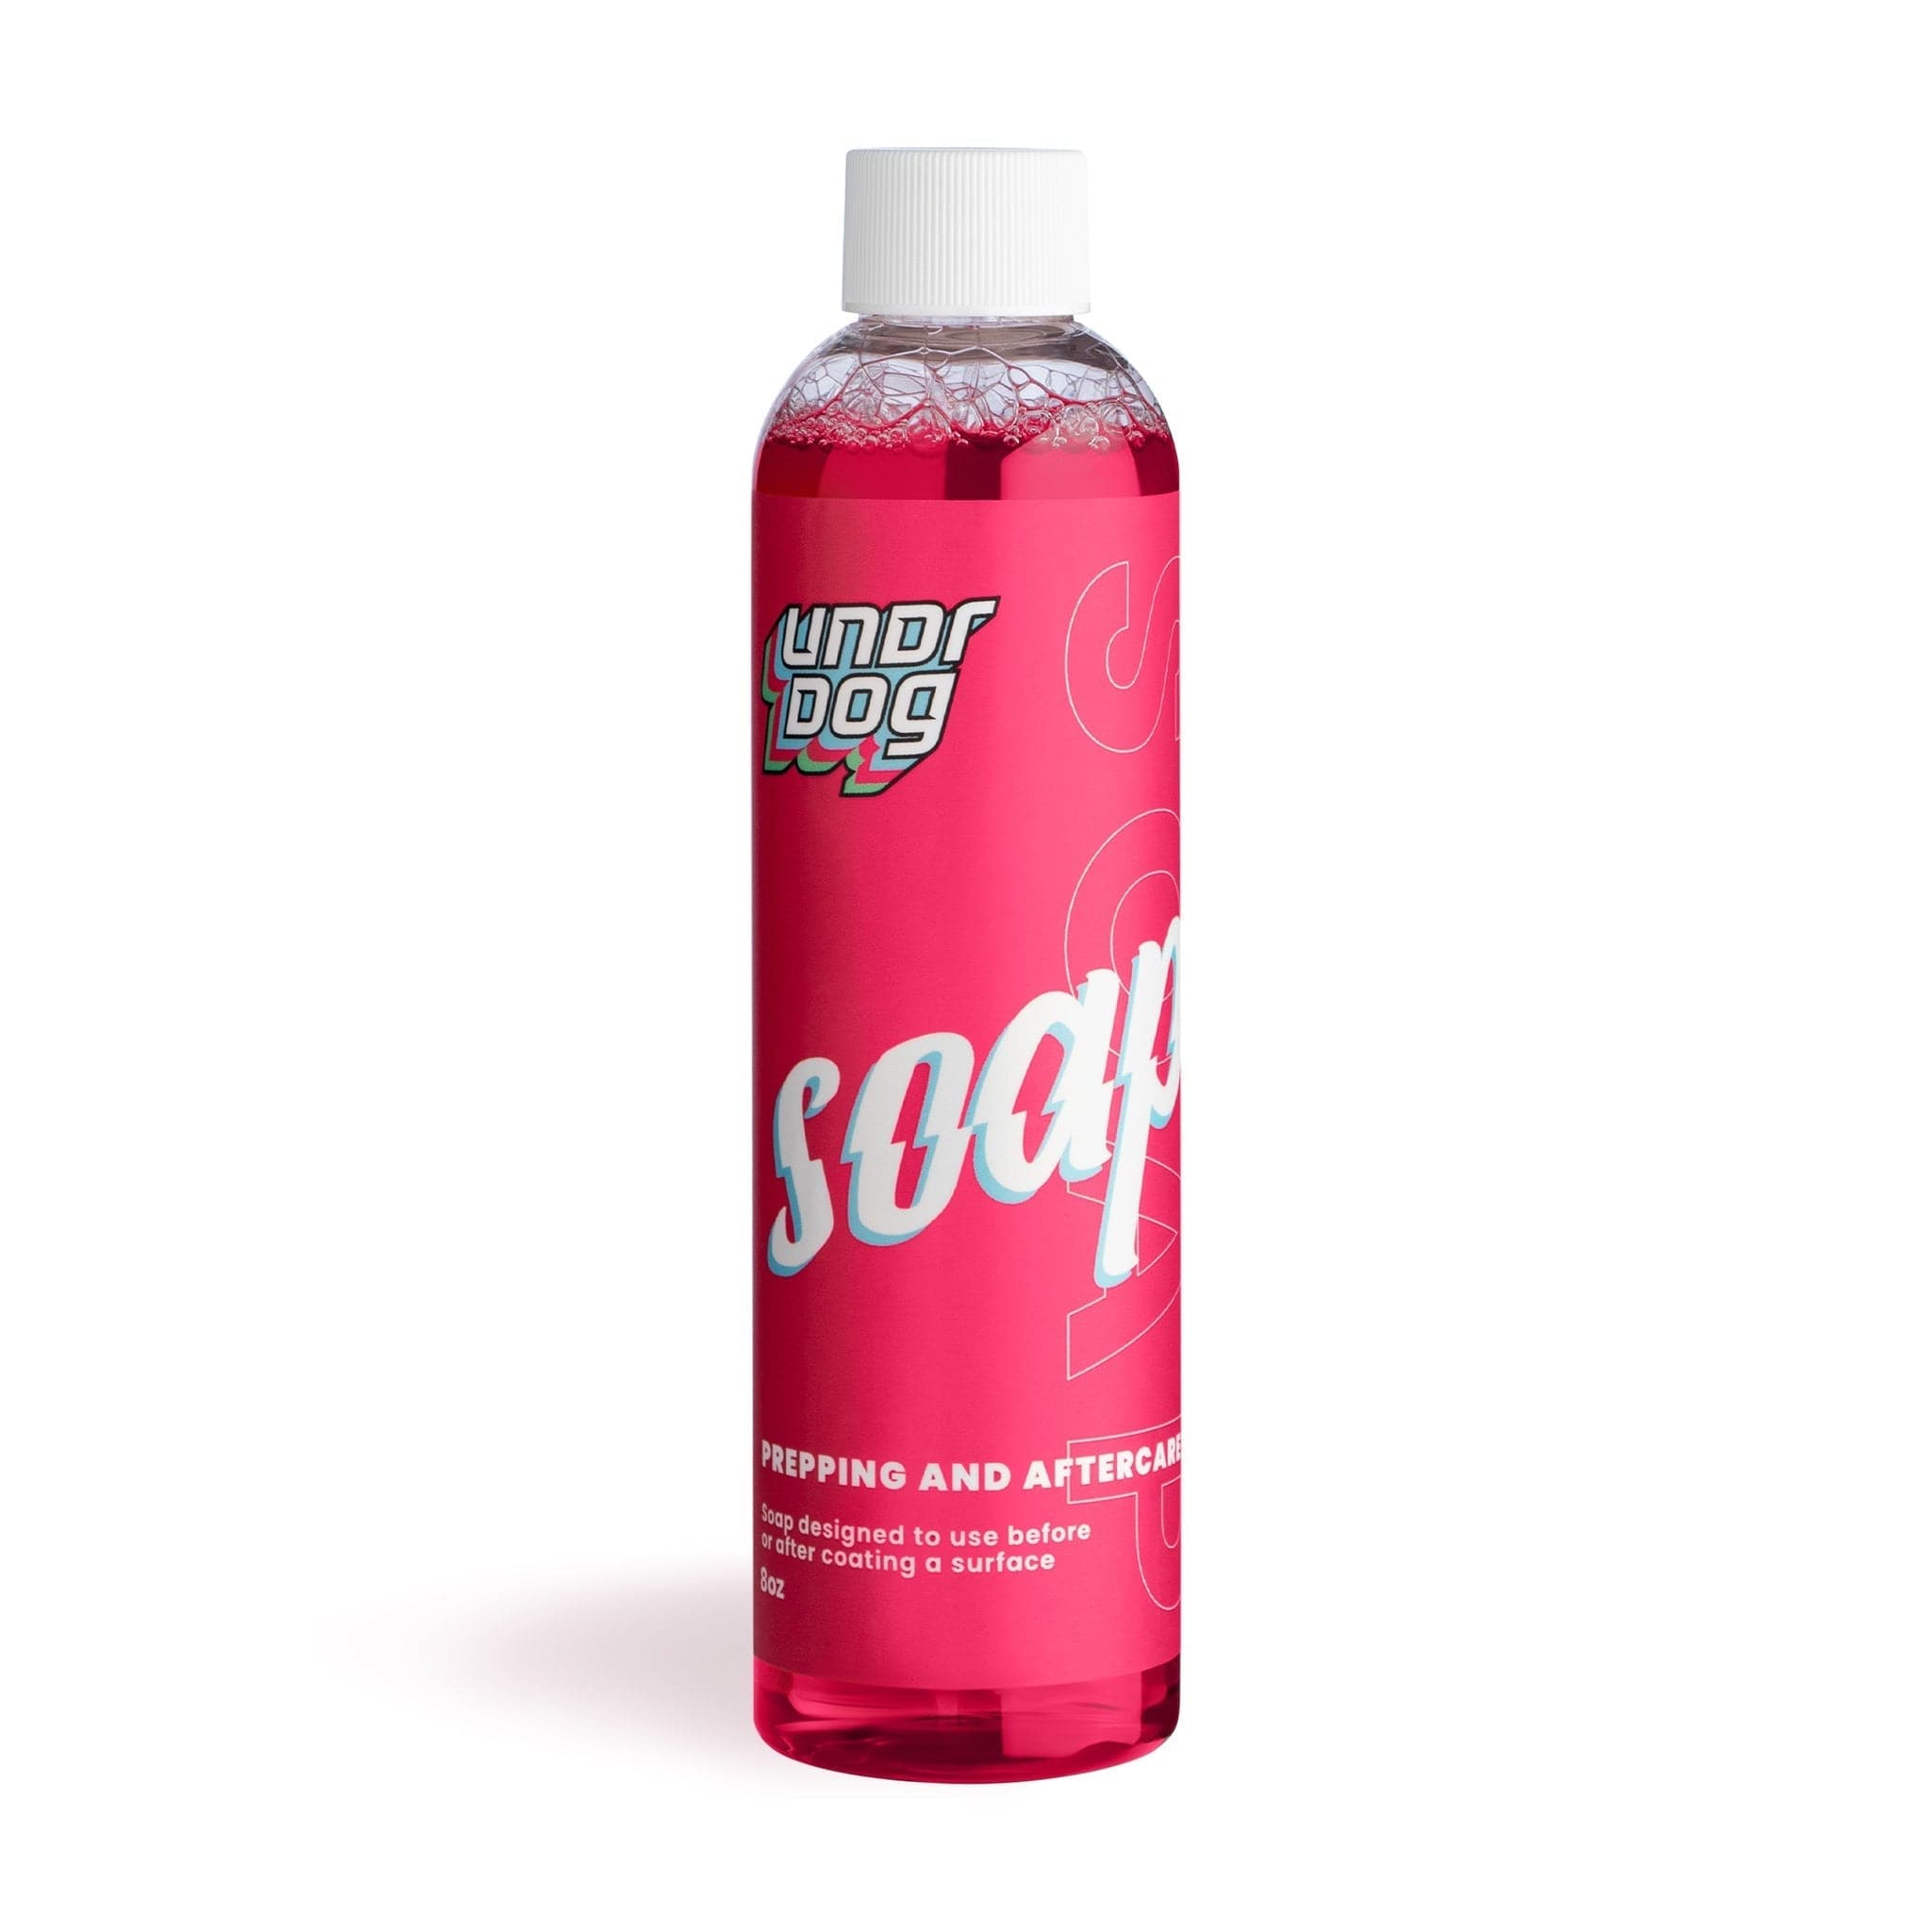 Soap_8oz_02e1cc4b-794d-496a-bb17-d3684a50c085.jpg - ColorPop Car Soap: Vibrant Cleaning for Every Hue! - Undrdog Surface Products